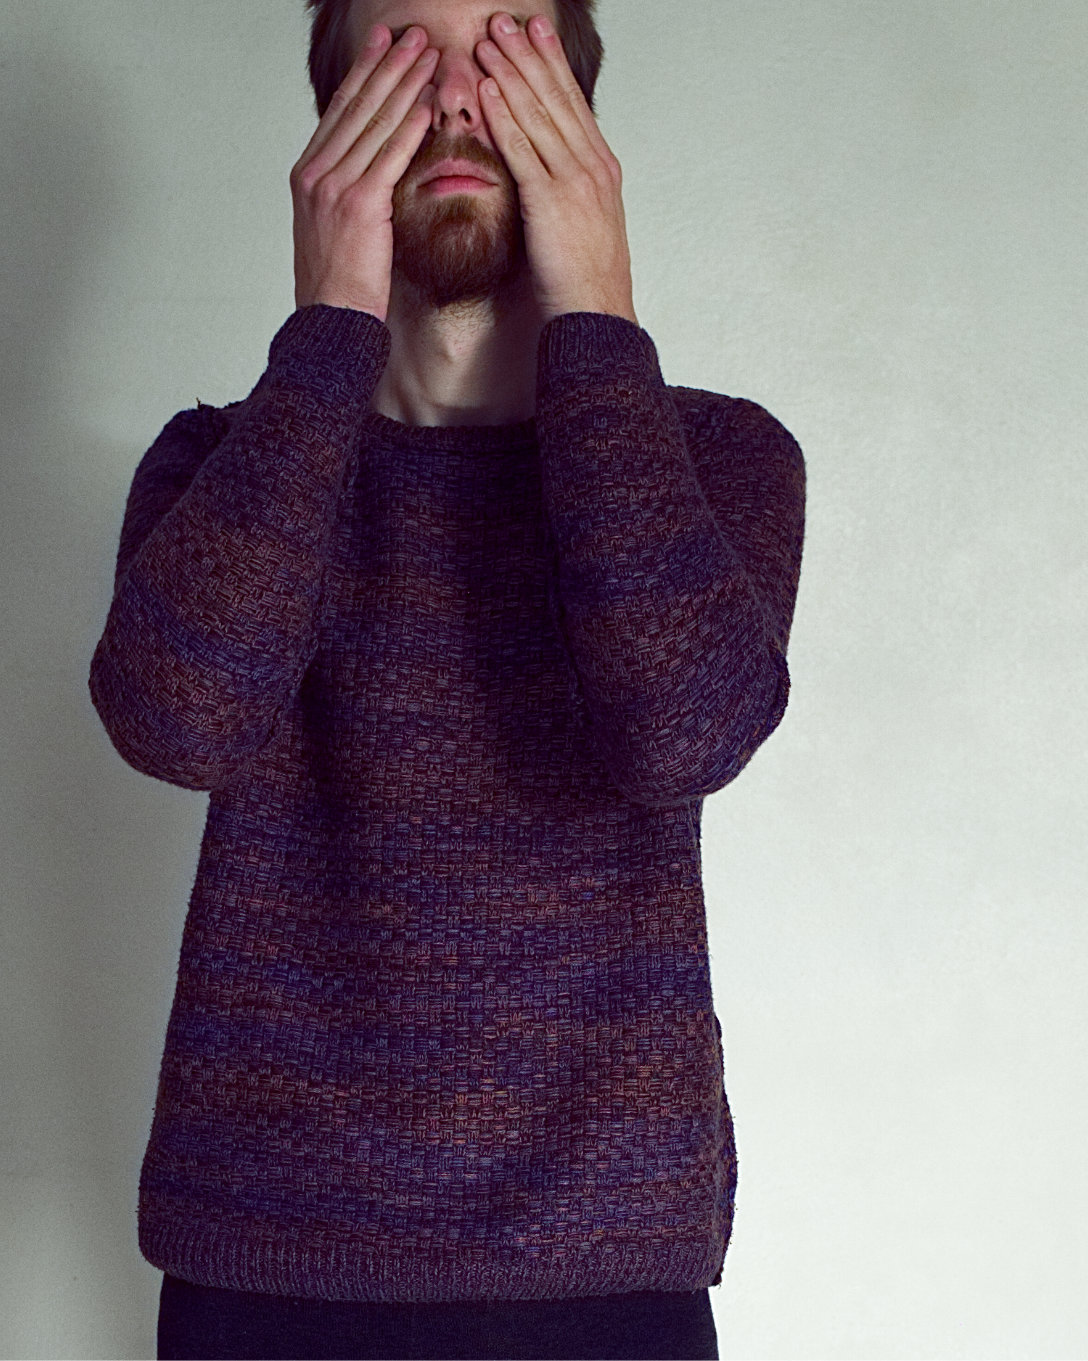 Male model wearing a dark sweater covers his eyes with his hands